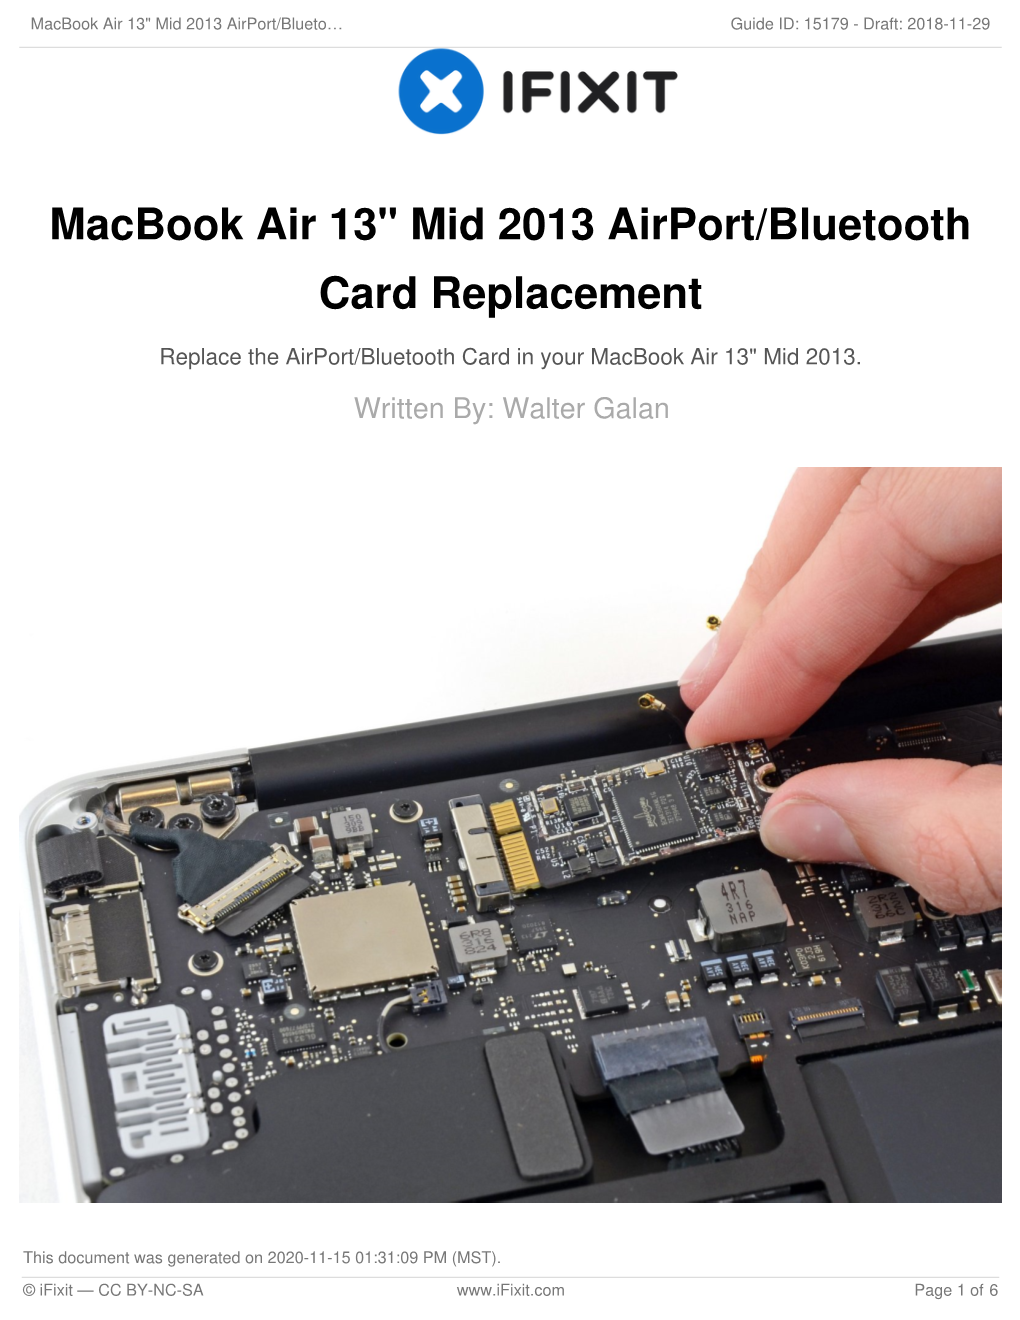 Macbook Air 13" Mid 2013 Airport/Bluetooth Card Replacement